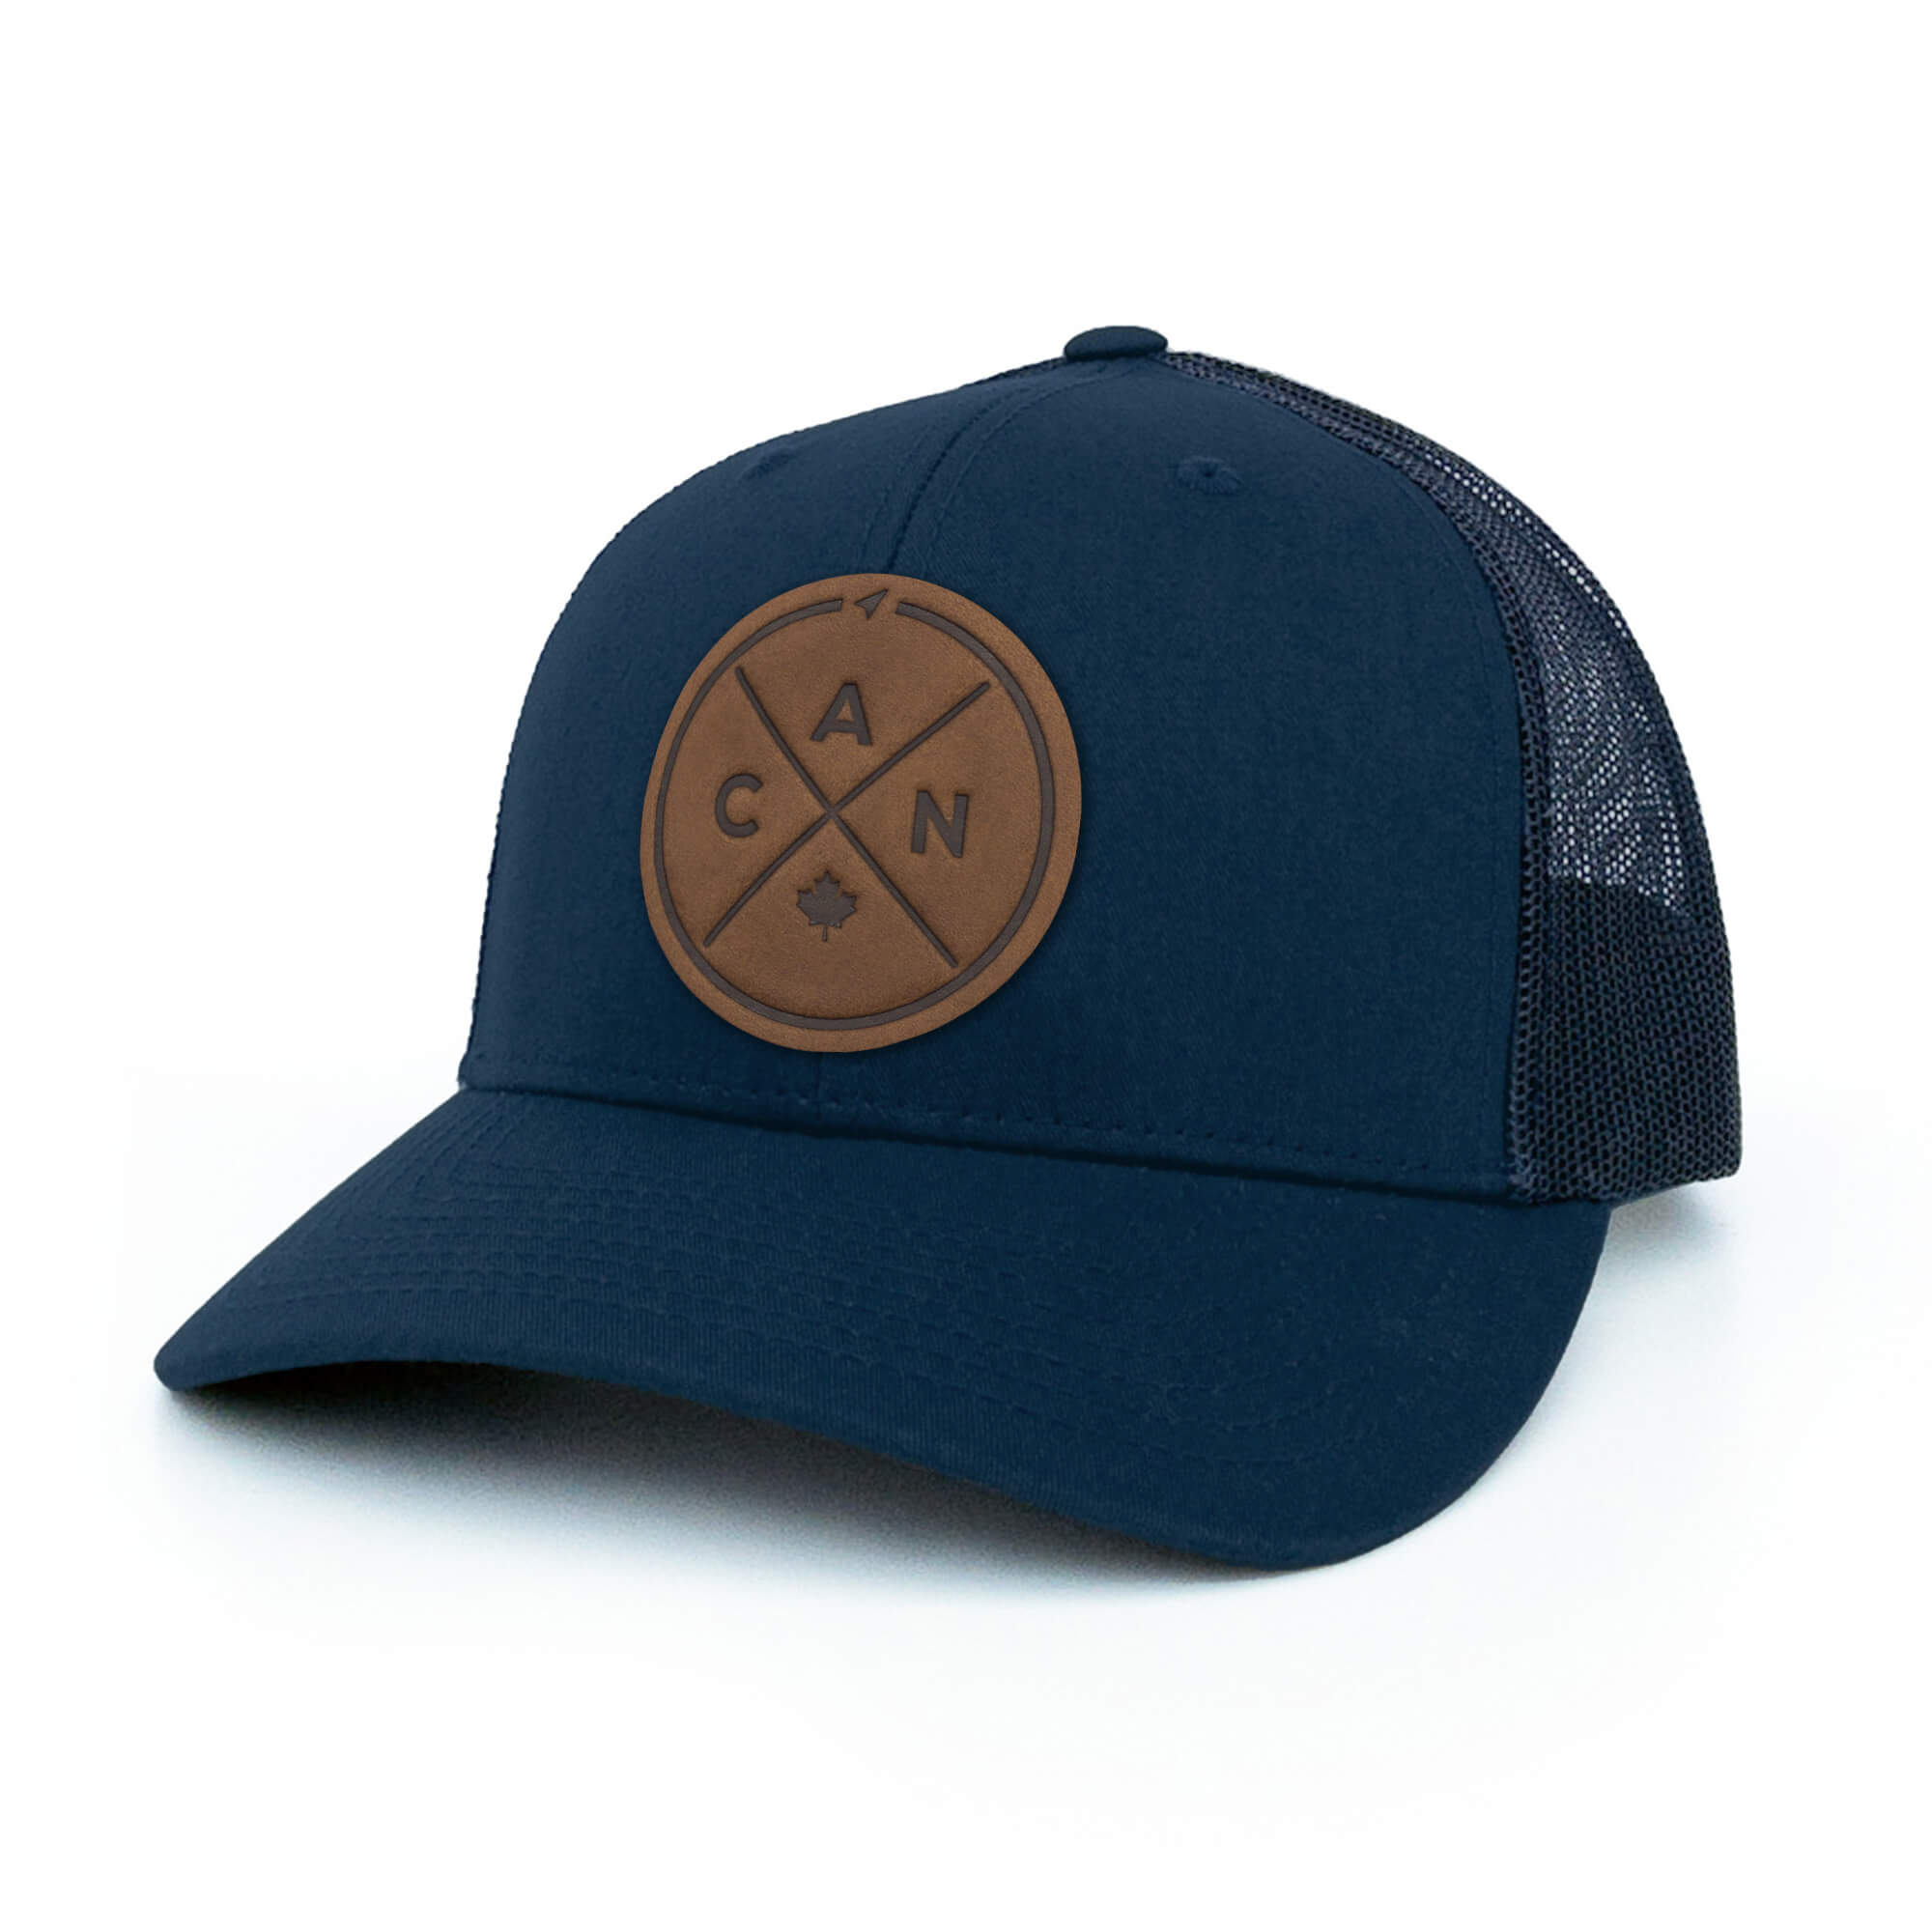 Navy trucker hat with full-grain leather patch of Canada Compass | BLACK-002-011, CHARC-002-011, NAVY-002-011, HGREY-002-011, MOSS-002-011, BROWN-002-011, RED-002-011